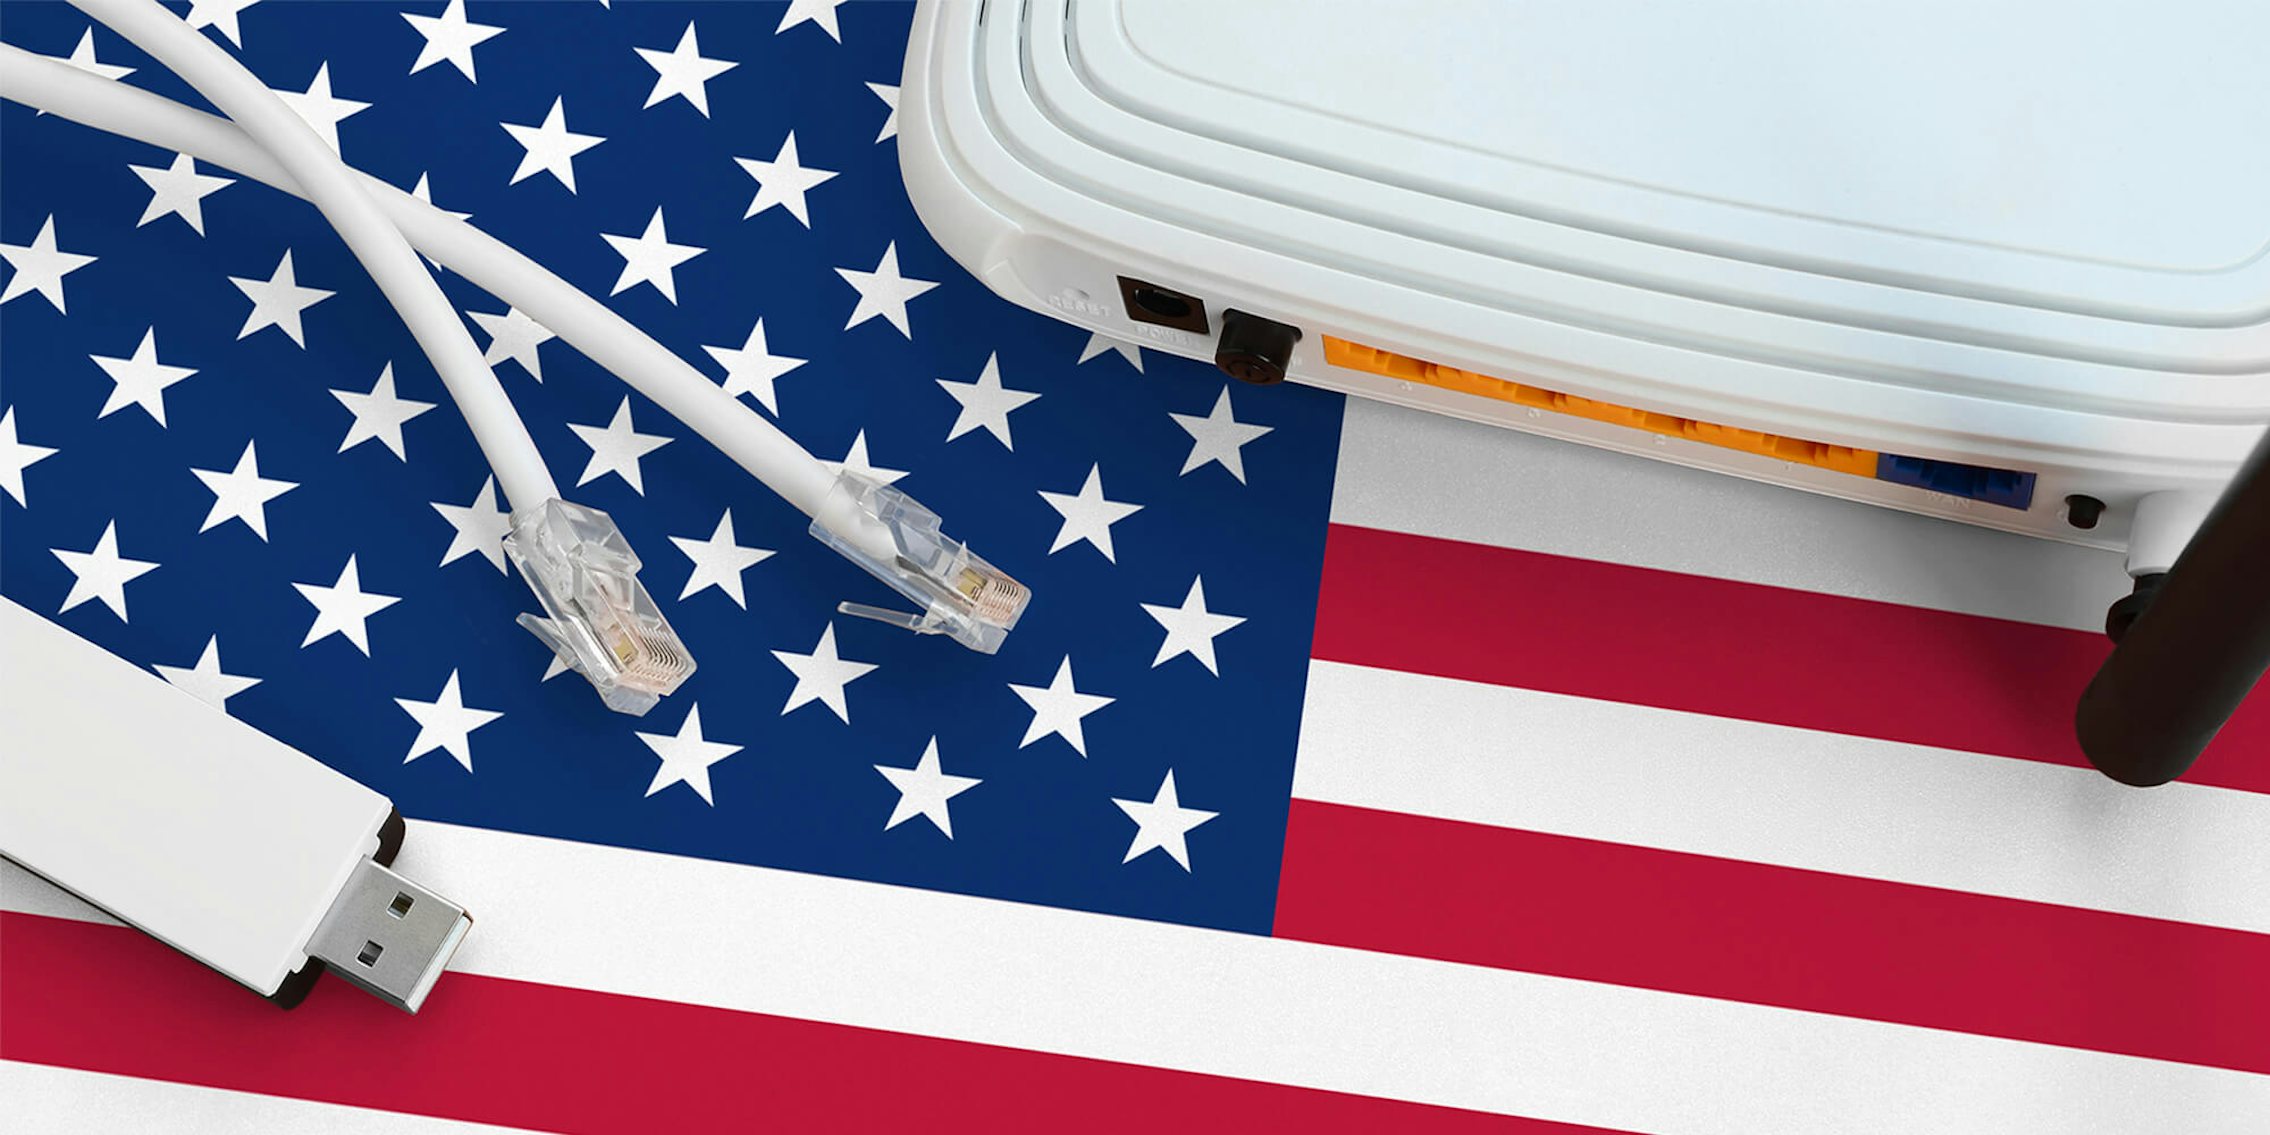 ethernet cables and router on united states flag